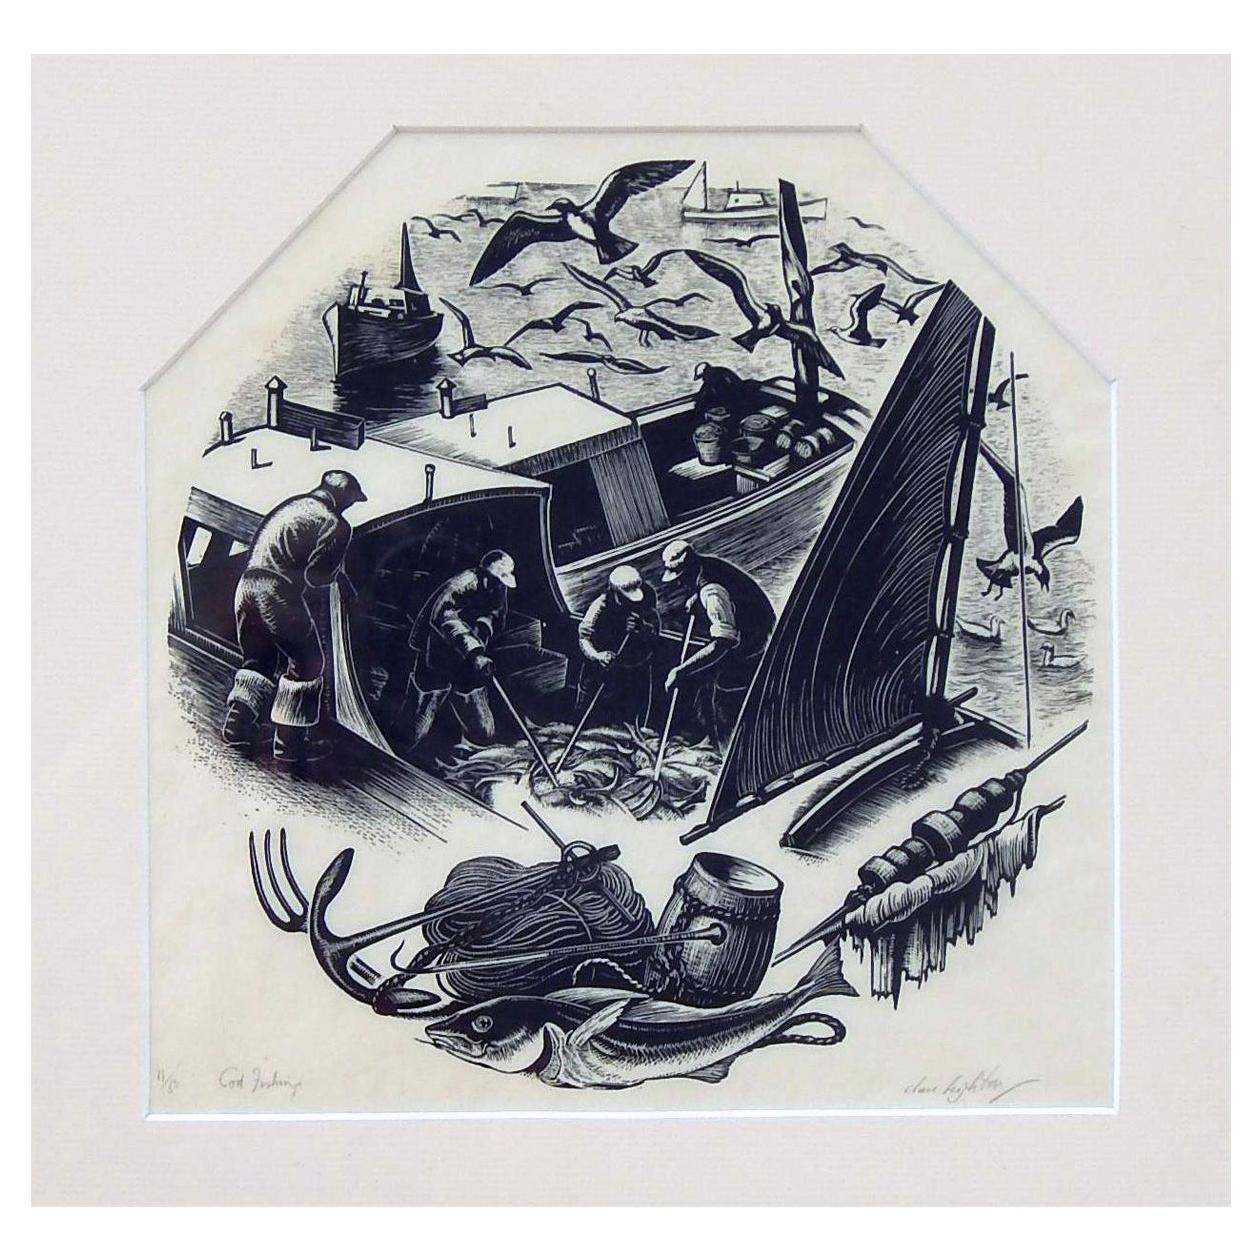 Clare Leighton Connecticut Artist, Wood Engraving for Wedgewood "Cod Fishing" For Sale